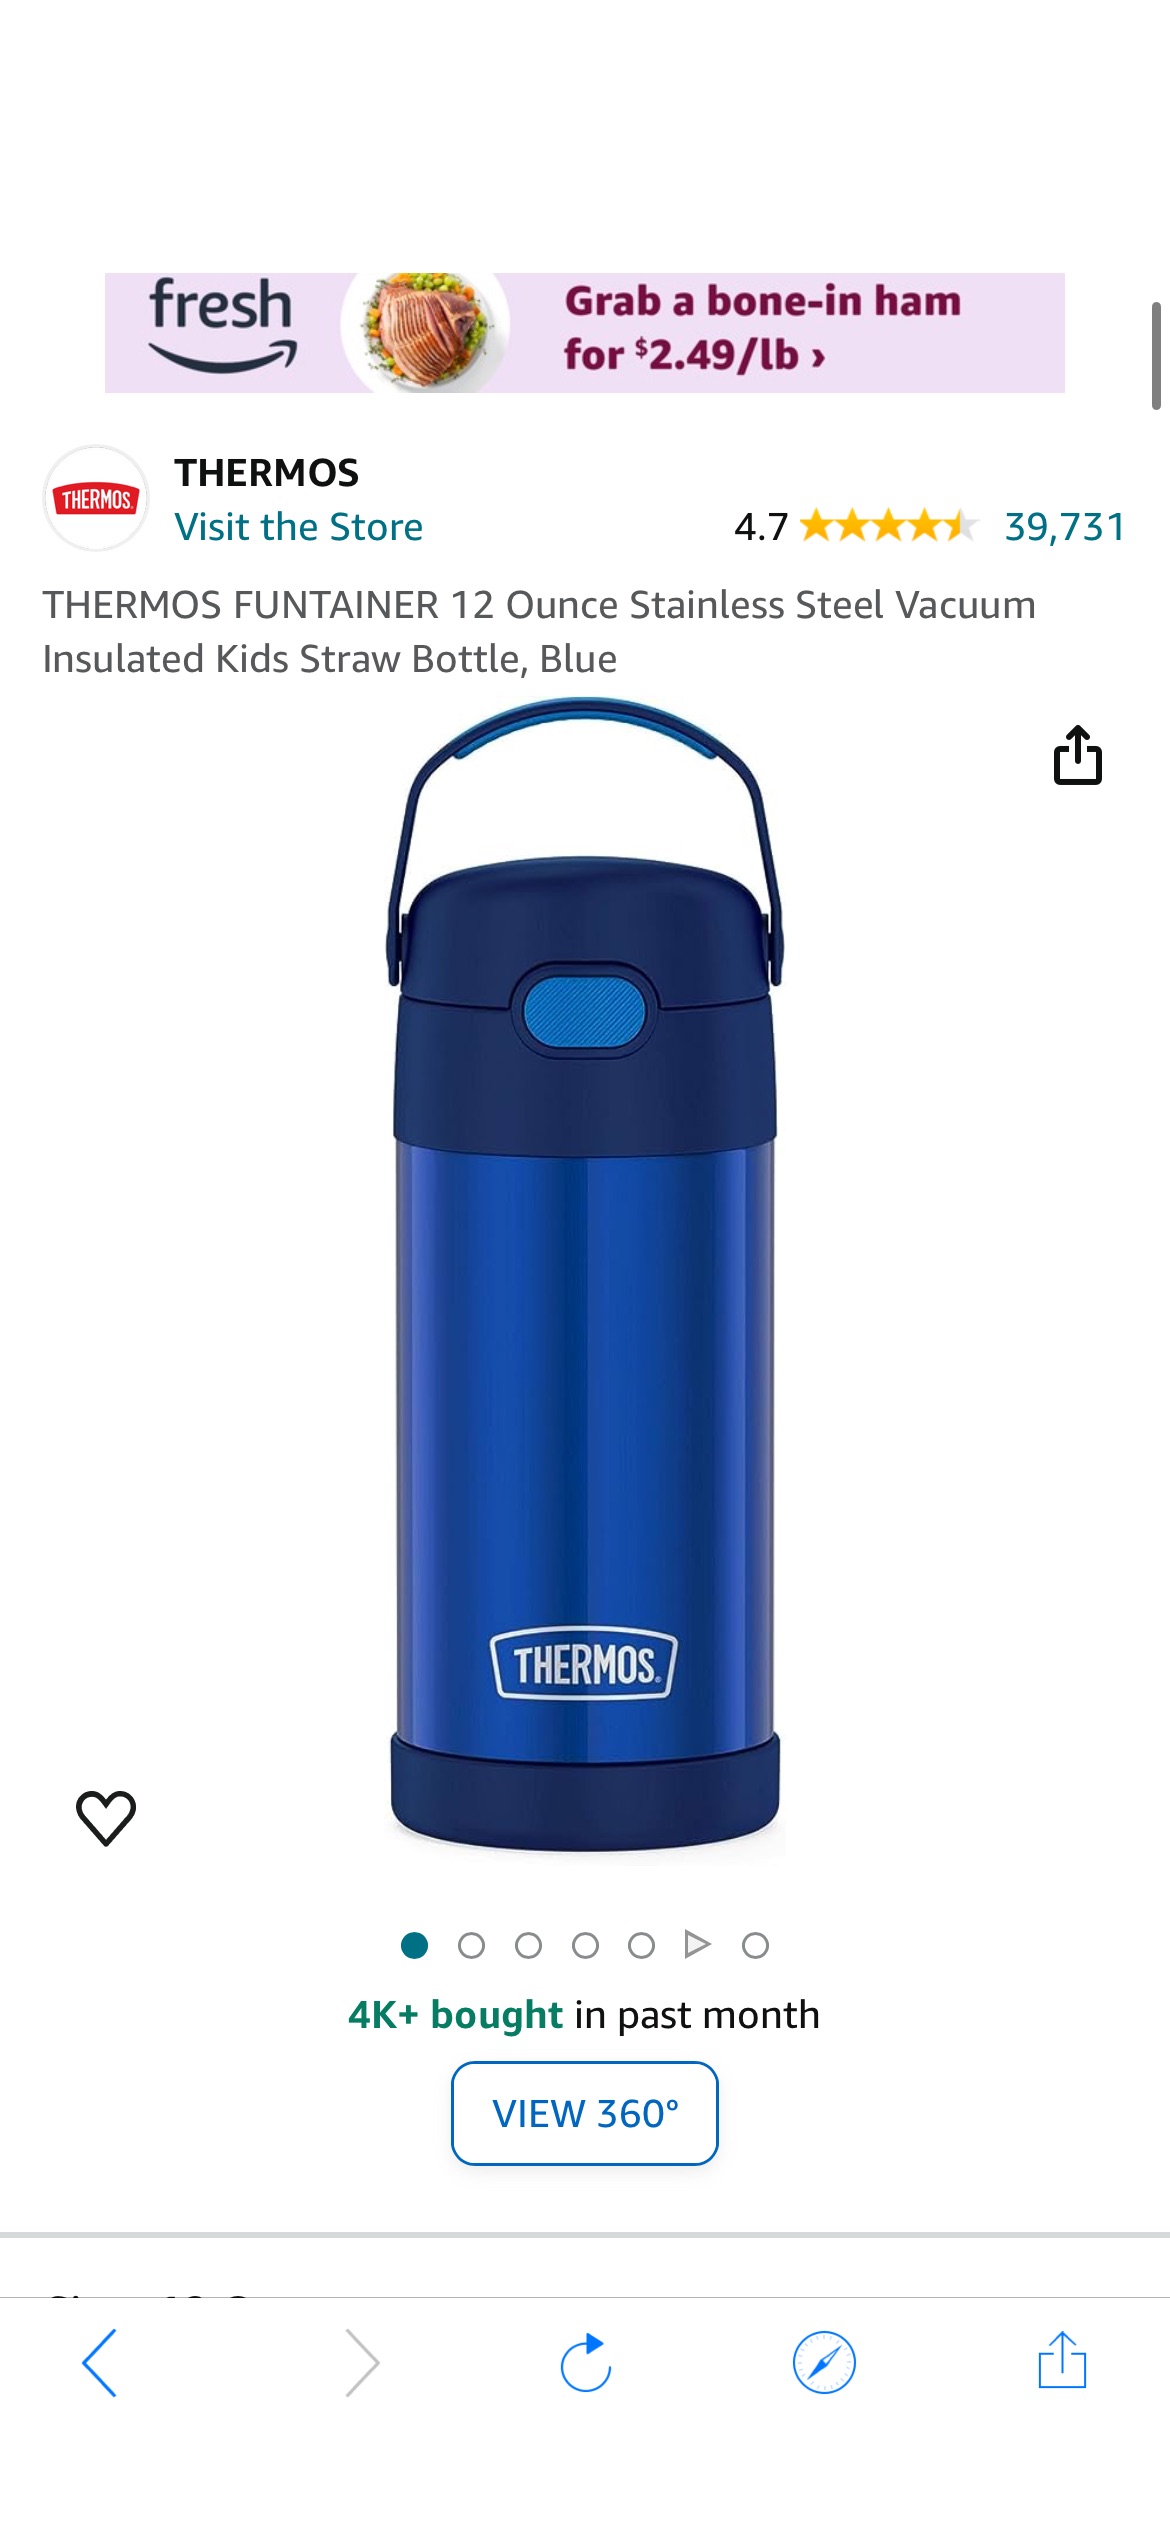 Amazon.com: THERMOS FUNTAINER 12 Ounce Stainless Steel Vacuum Insulated Kids Straw Bottle, Blue: Home & Kitchen